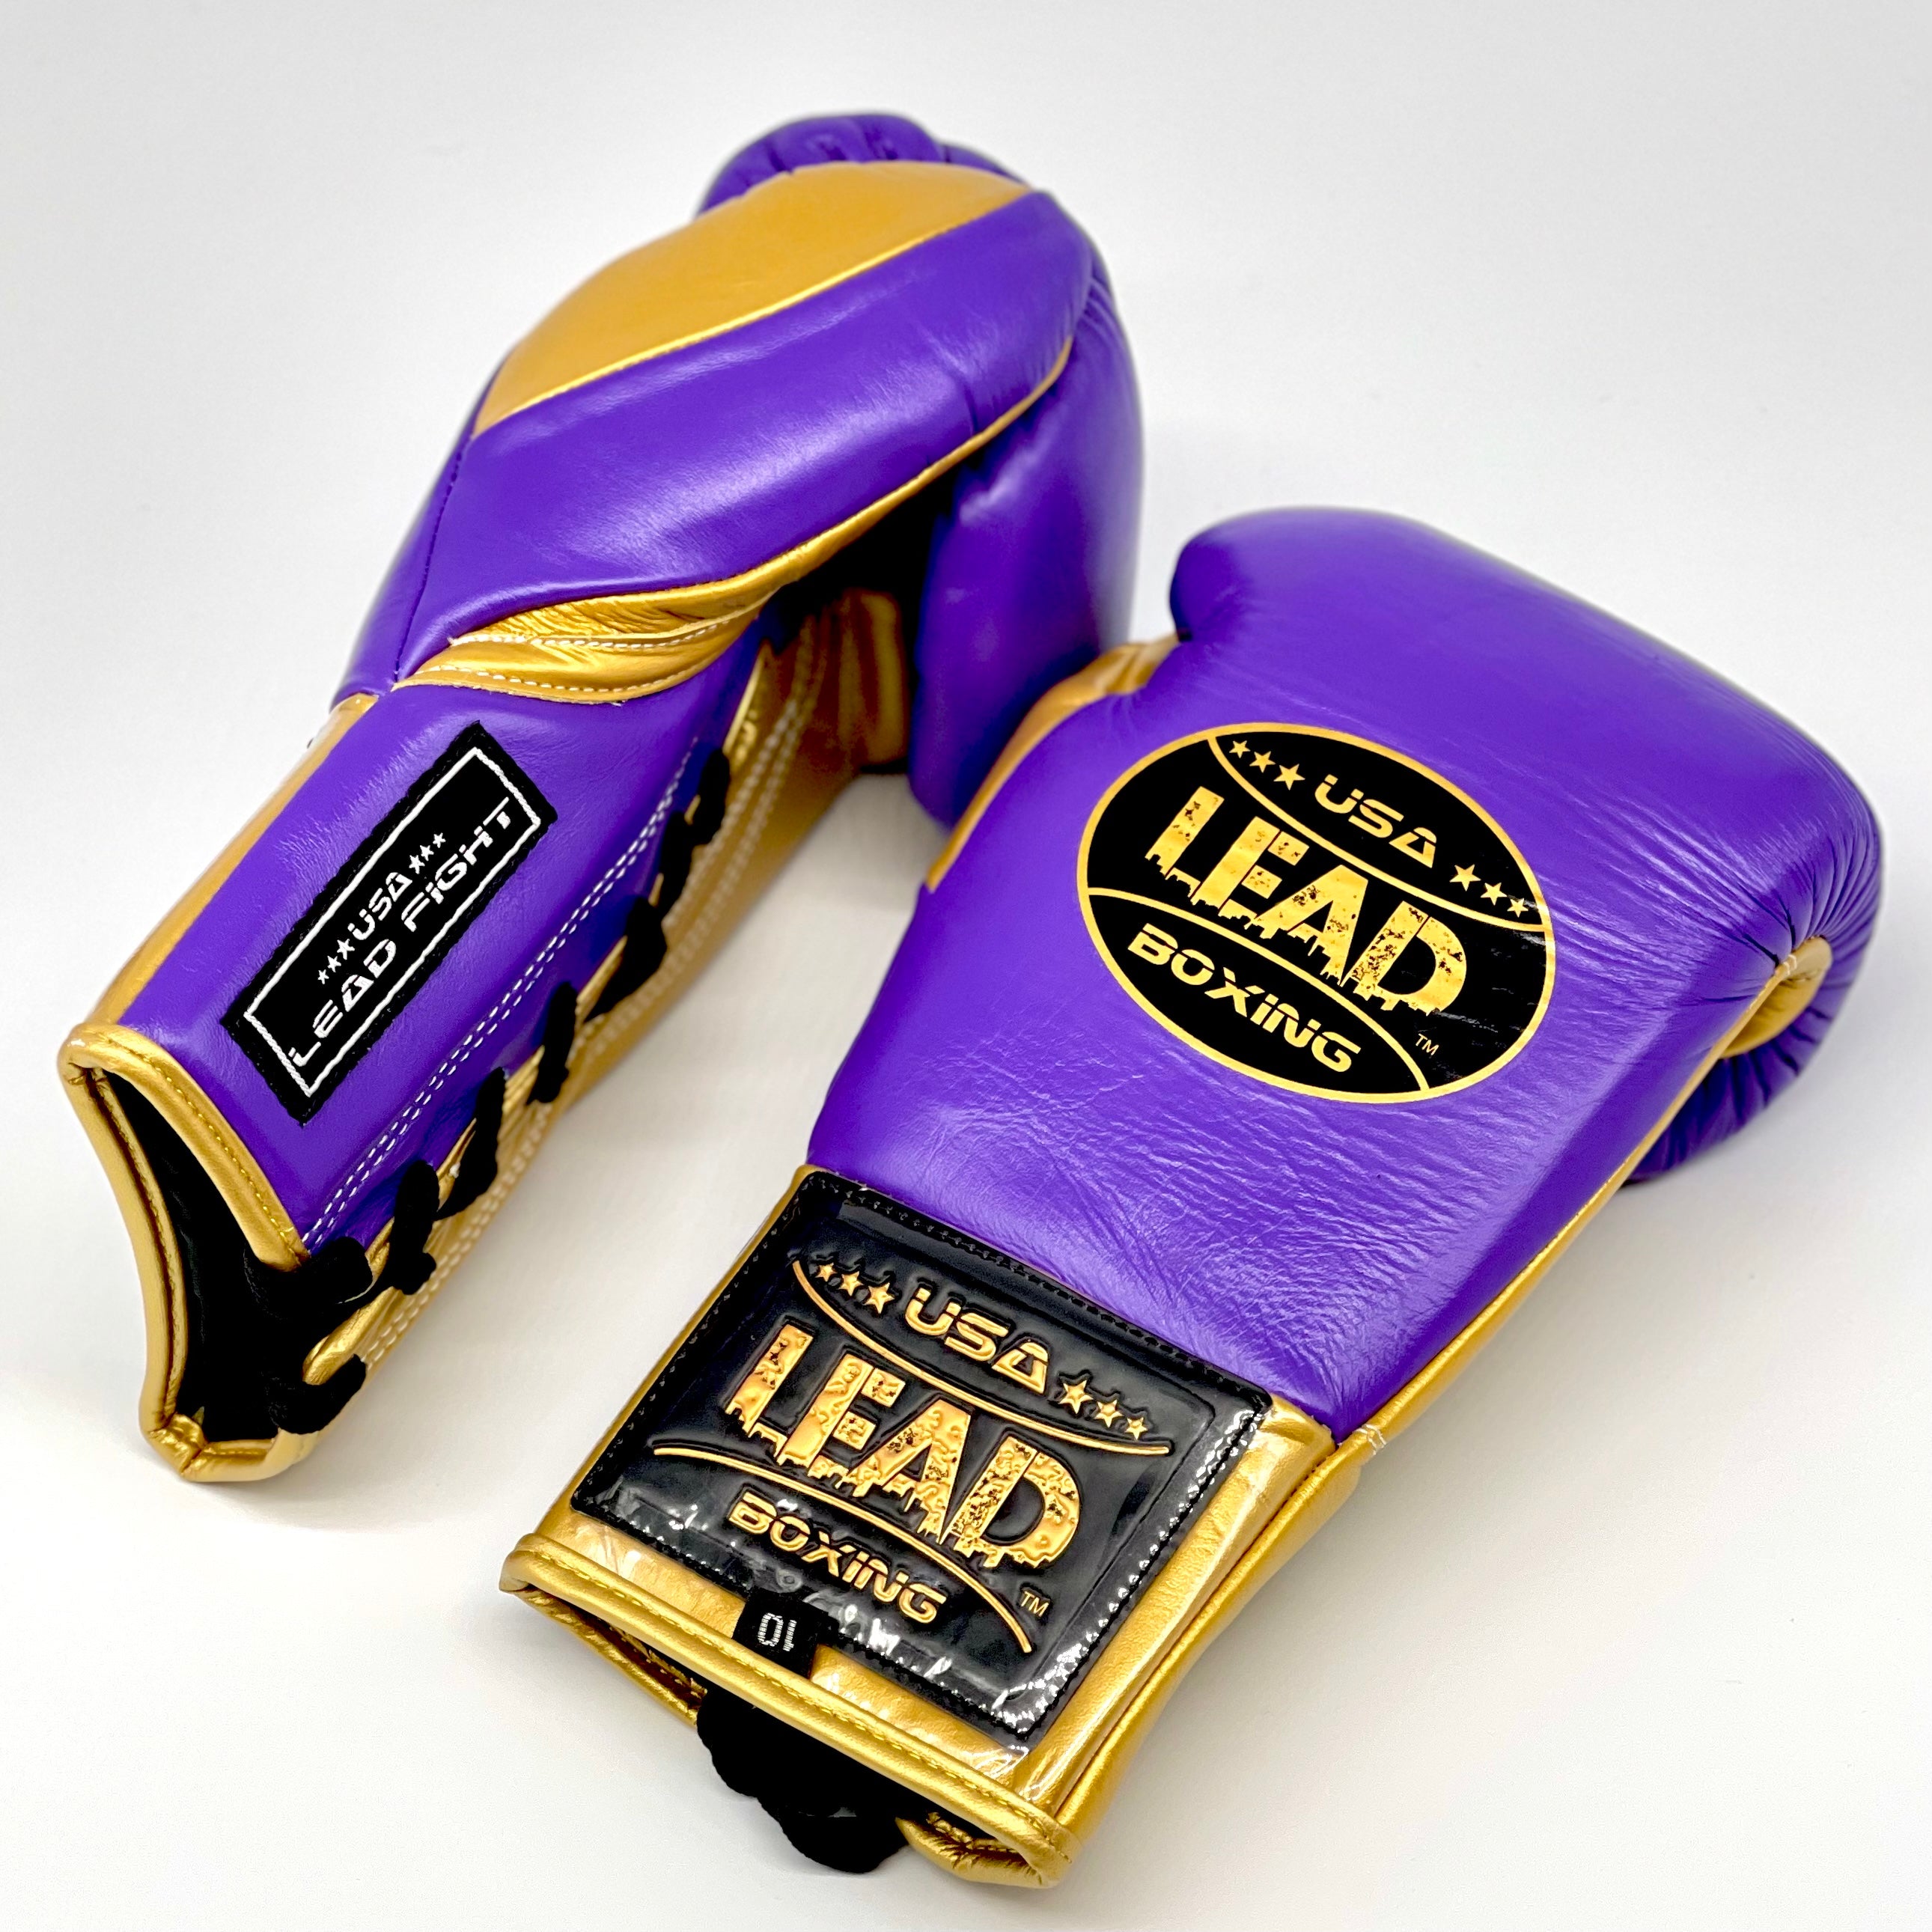 LEAD Boxing Fight Gloves (Purple /Gold)